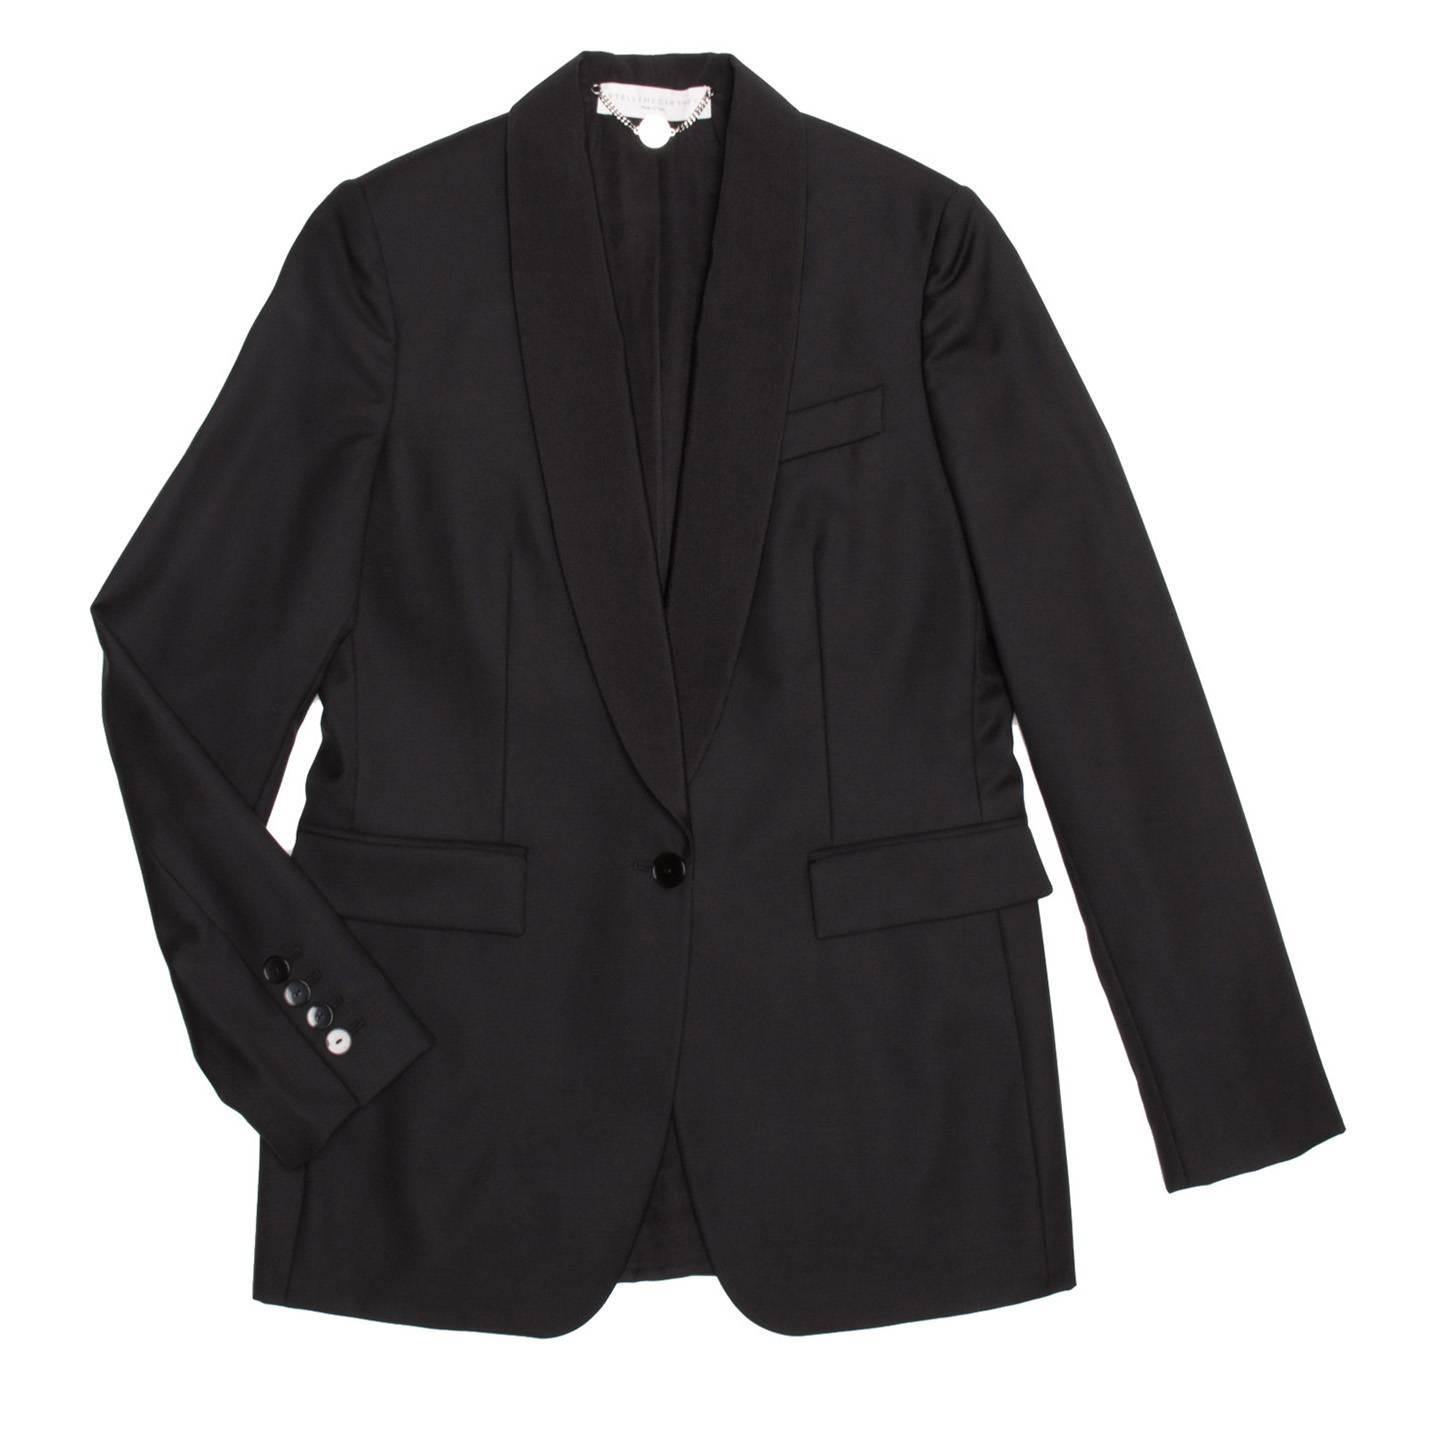 Black wool tuxedo style tailored jacket. Long shawl collar in a contrasting tonal fabric and a single button opening. 2 pocket flaps at front and back cuff vent with 4 buttons.

Size  44 Italian sizing

Condition  Excellent: never worn